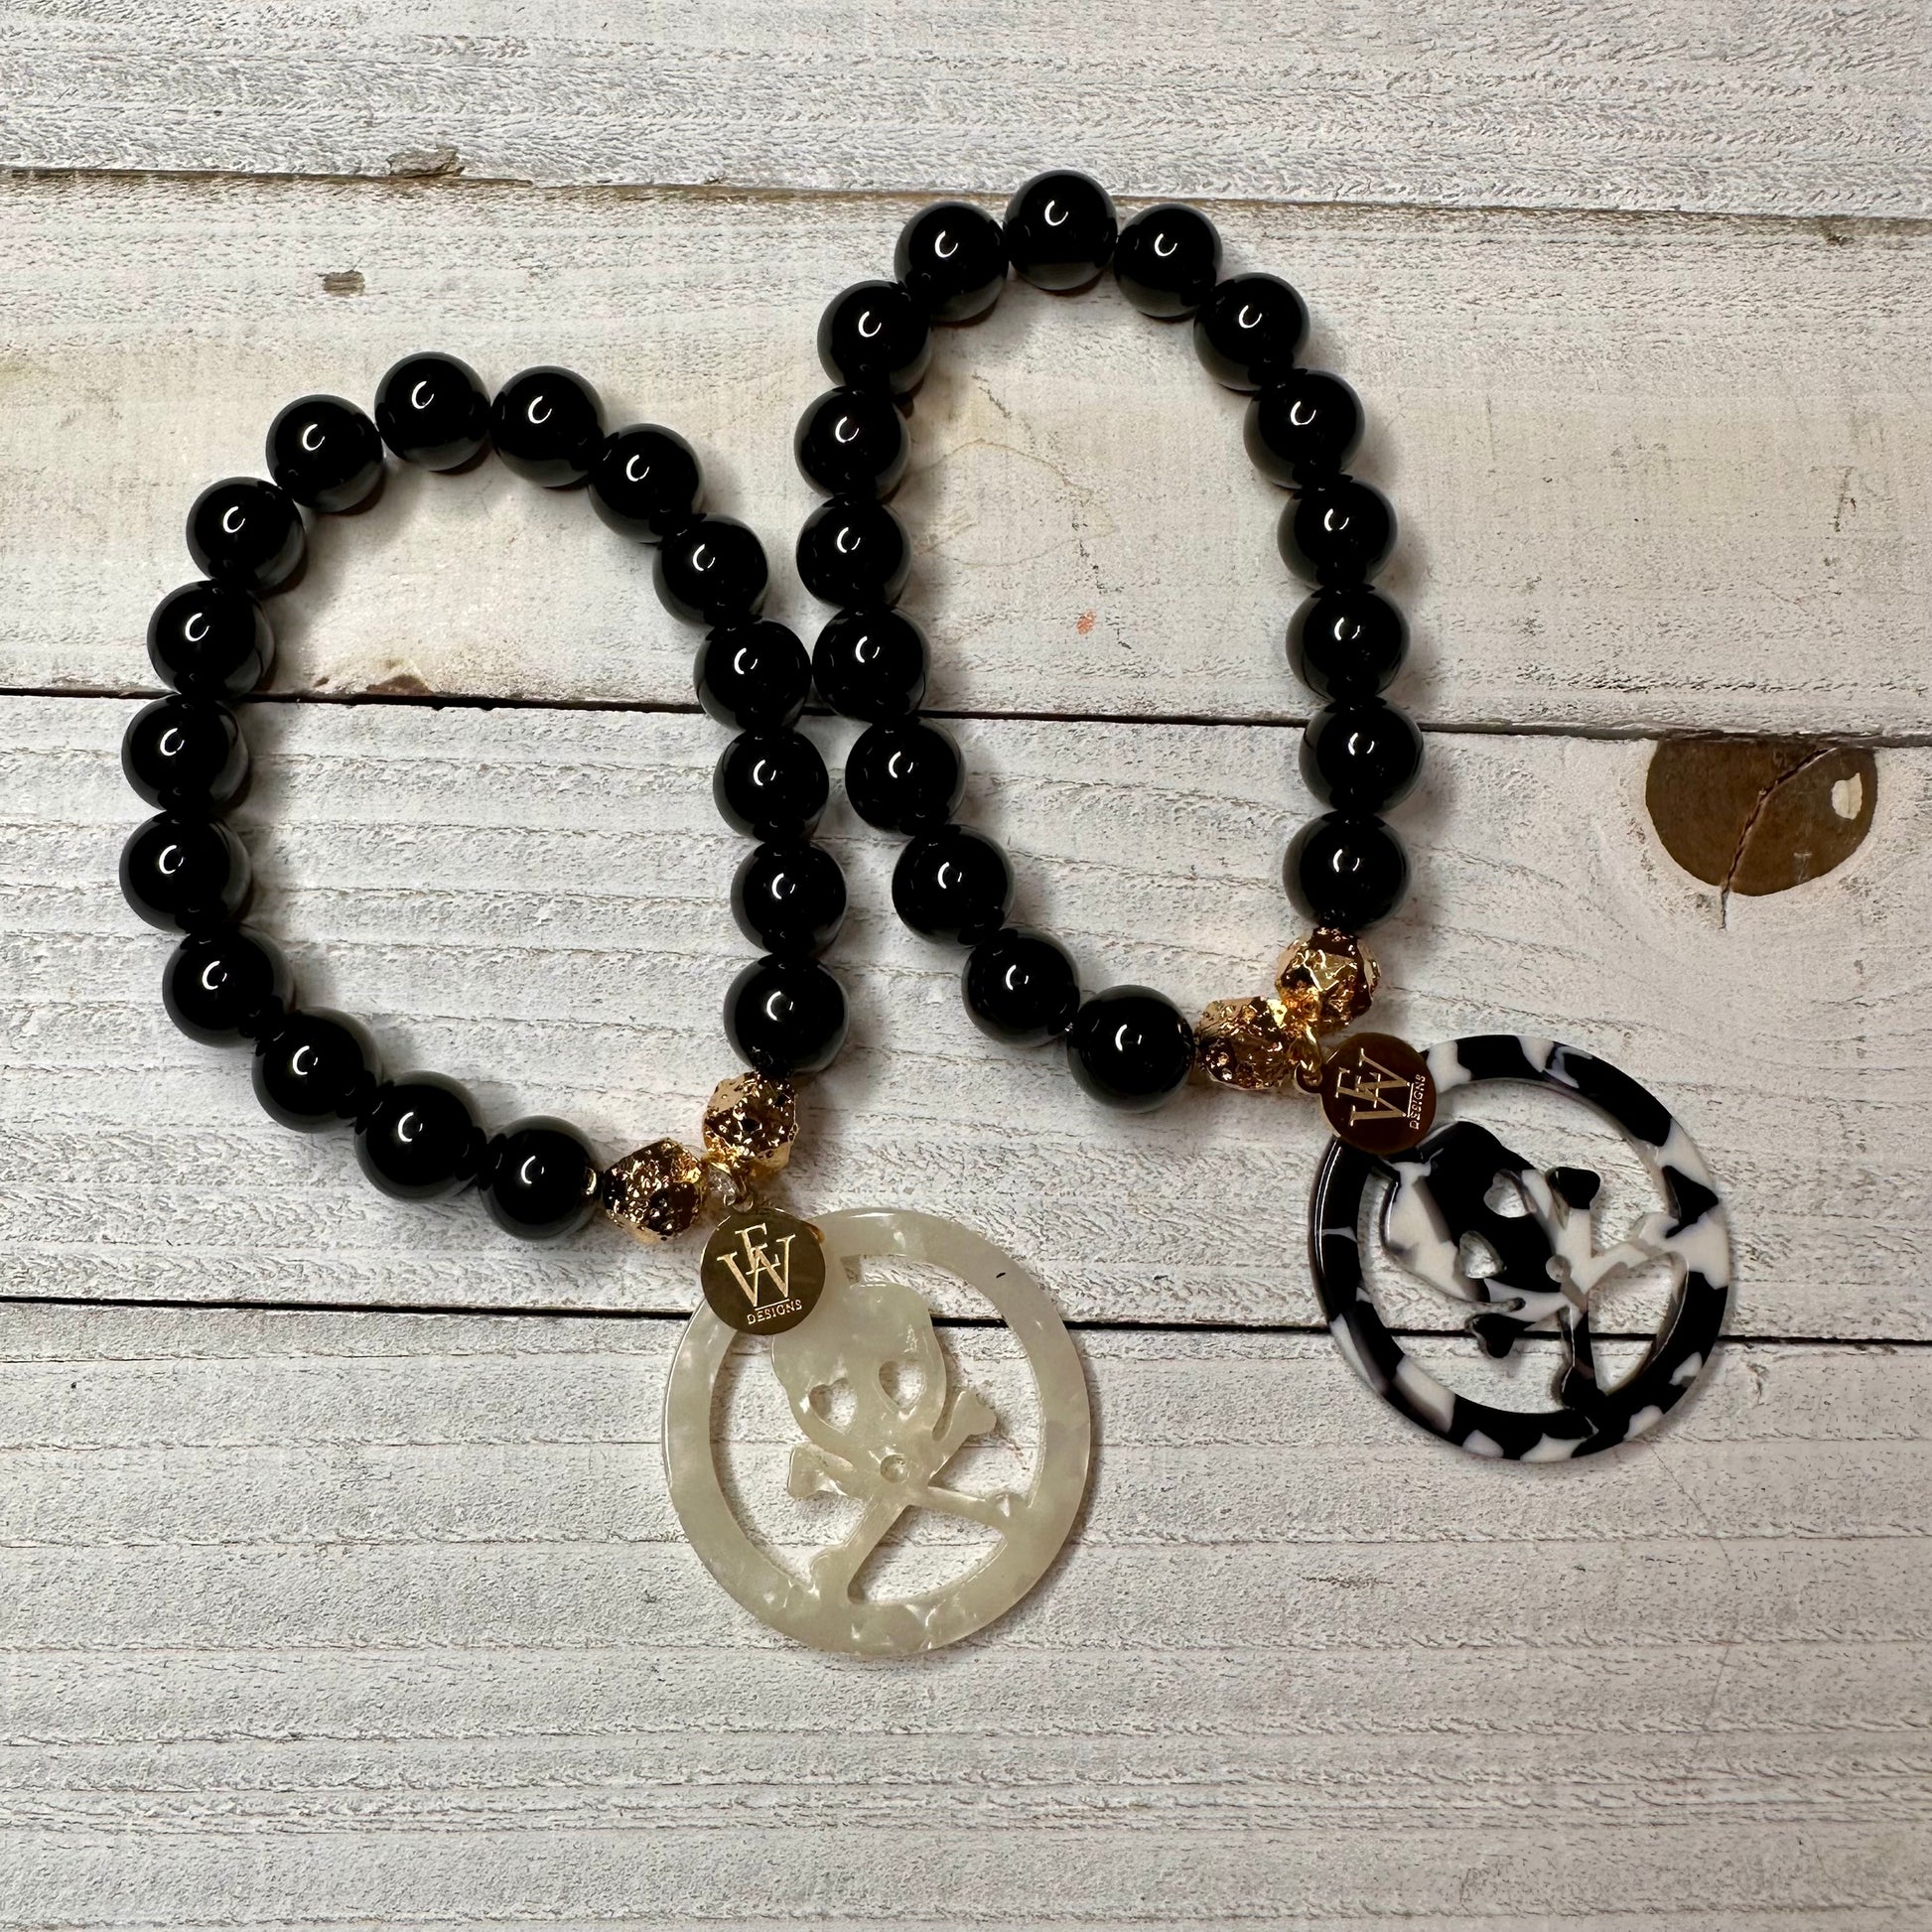 Black Agate with skull charms